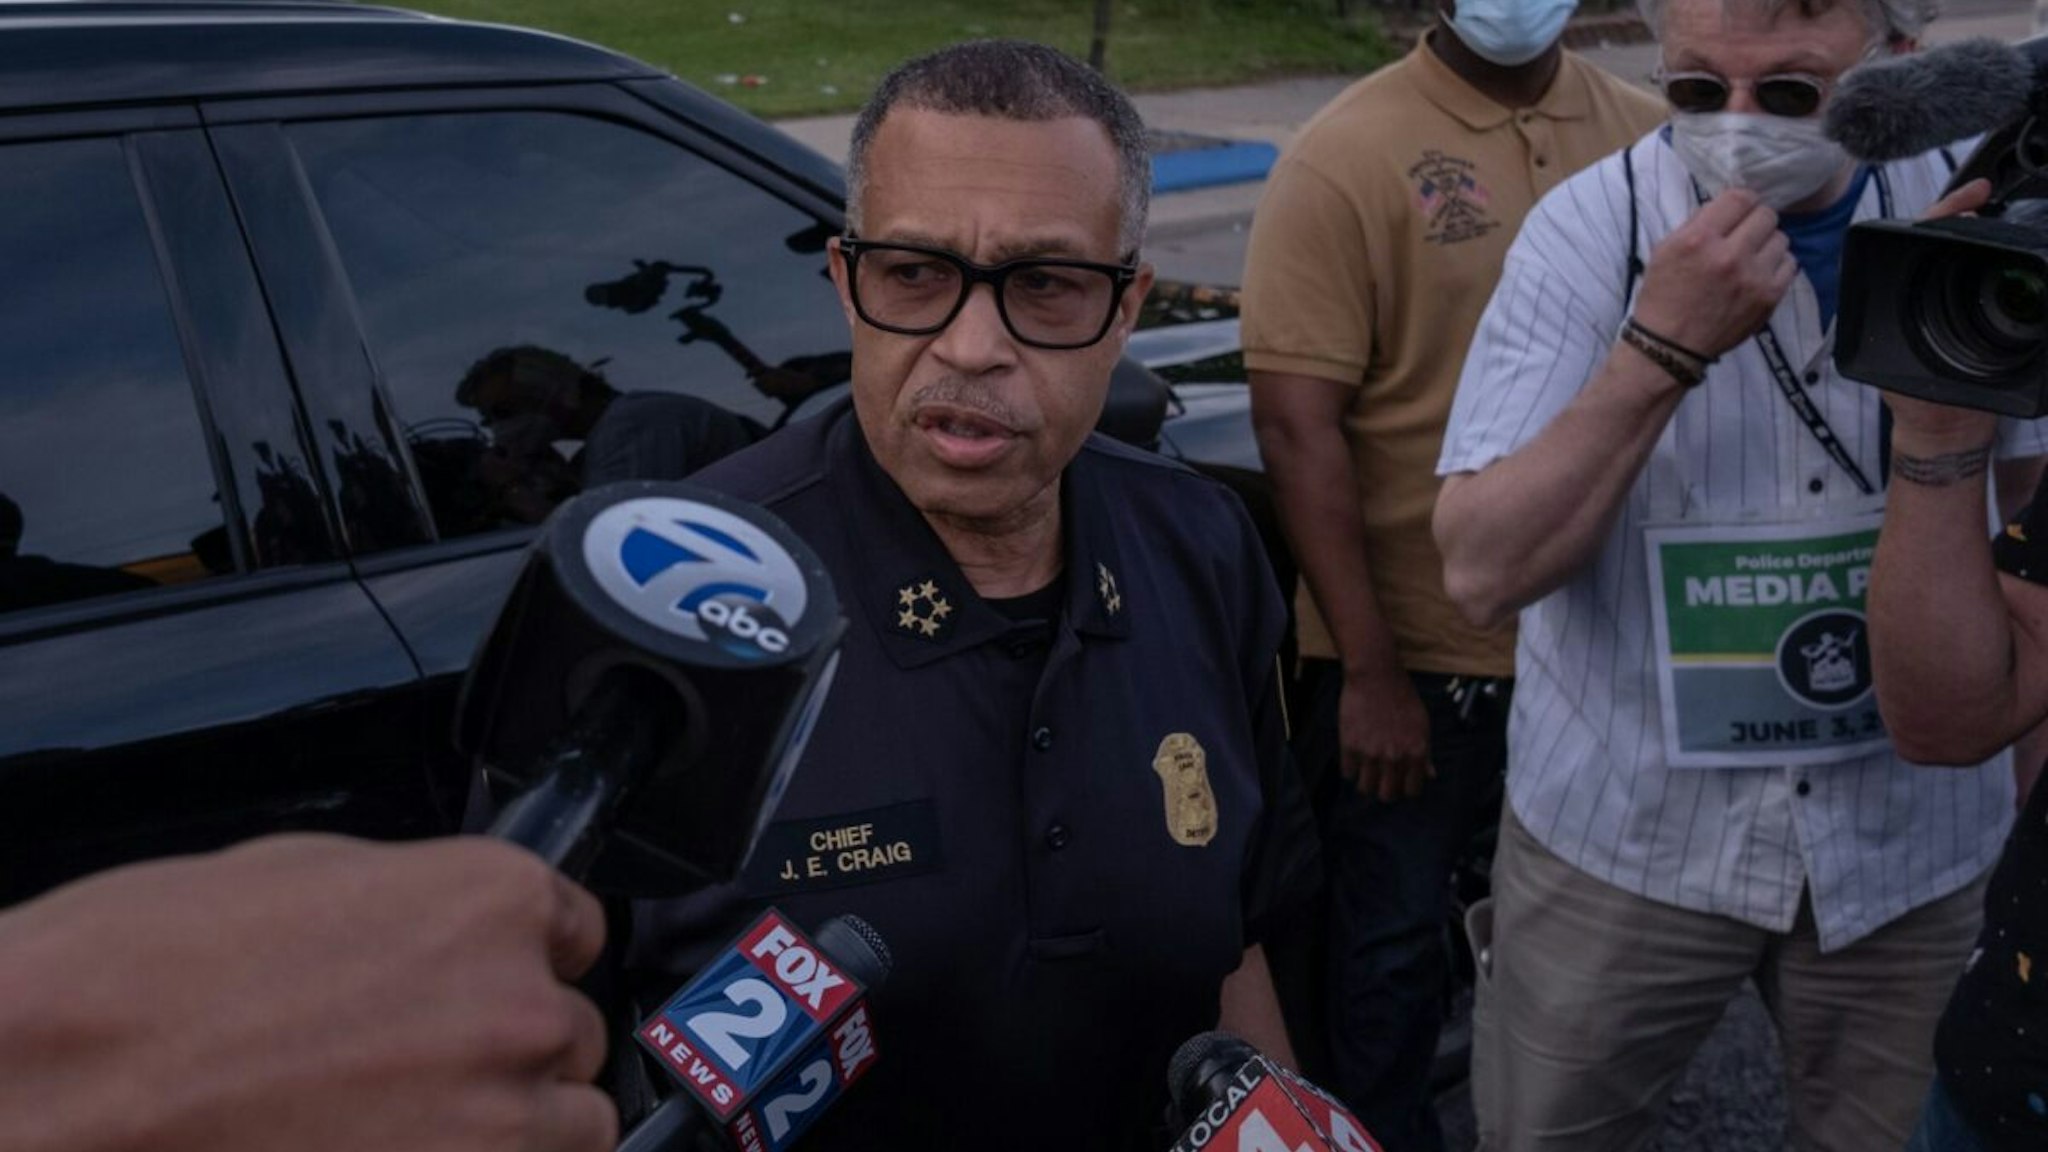 The Chief of Detroit Police James Craig speaks with the press about the protests taking place in Detroit, Michigan, June 3,2020